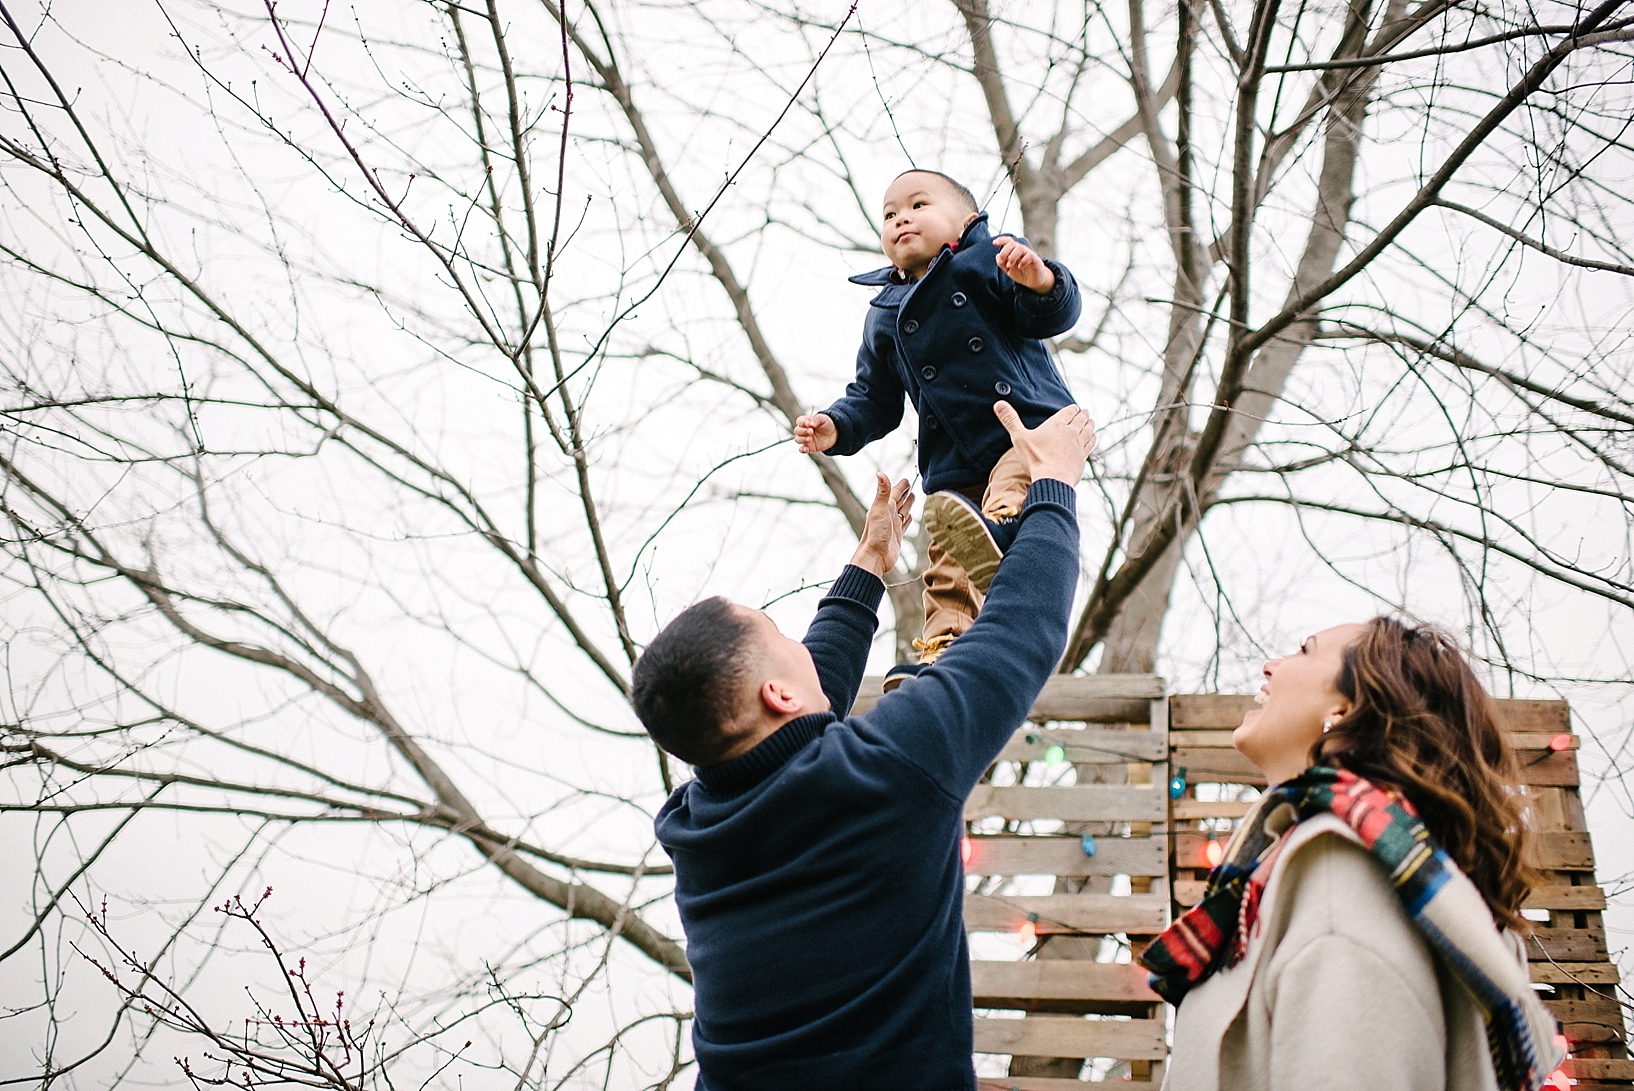 dad tossing toddler son high in the air with mom standing nearby laughing